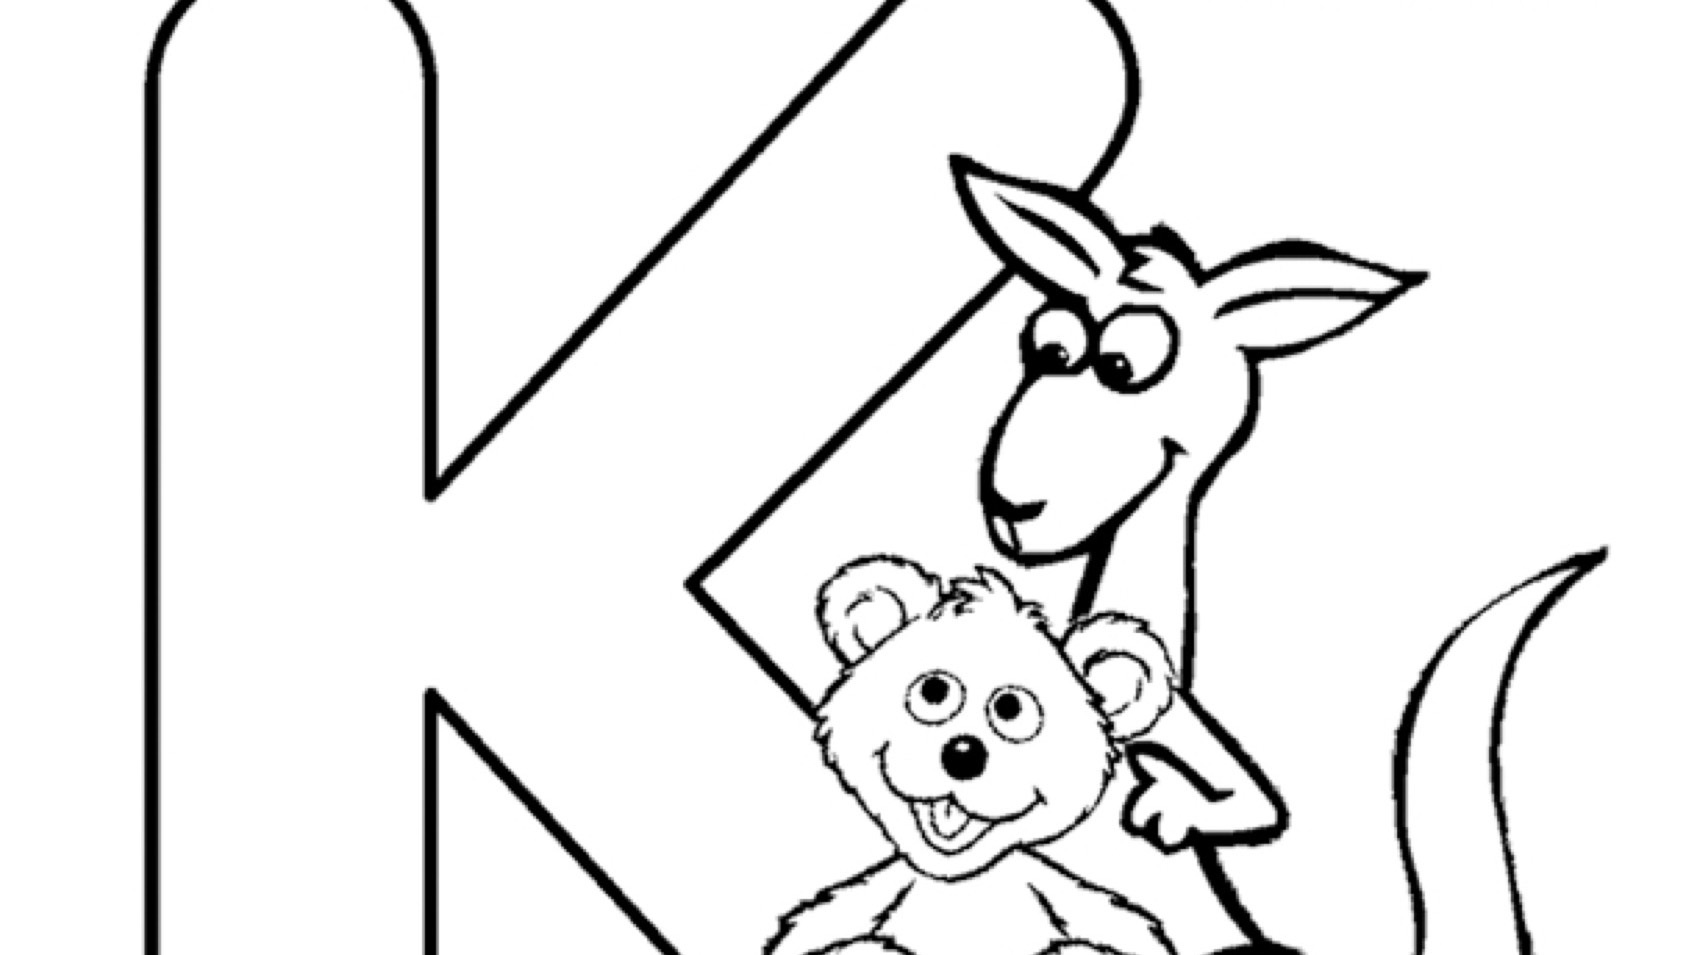 The Letter K Coloring Page | Kids Coloring… | PBS KIDS for Parents